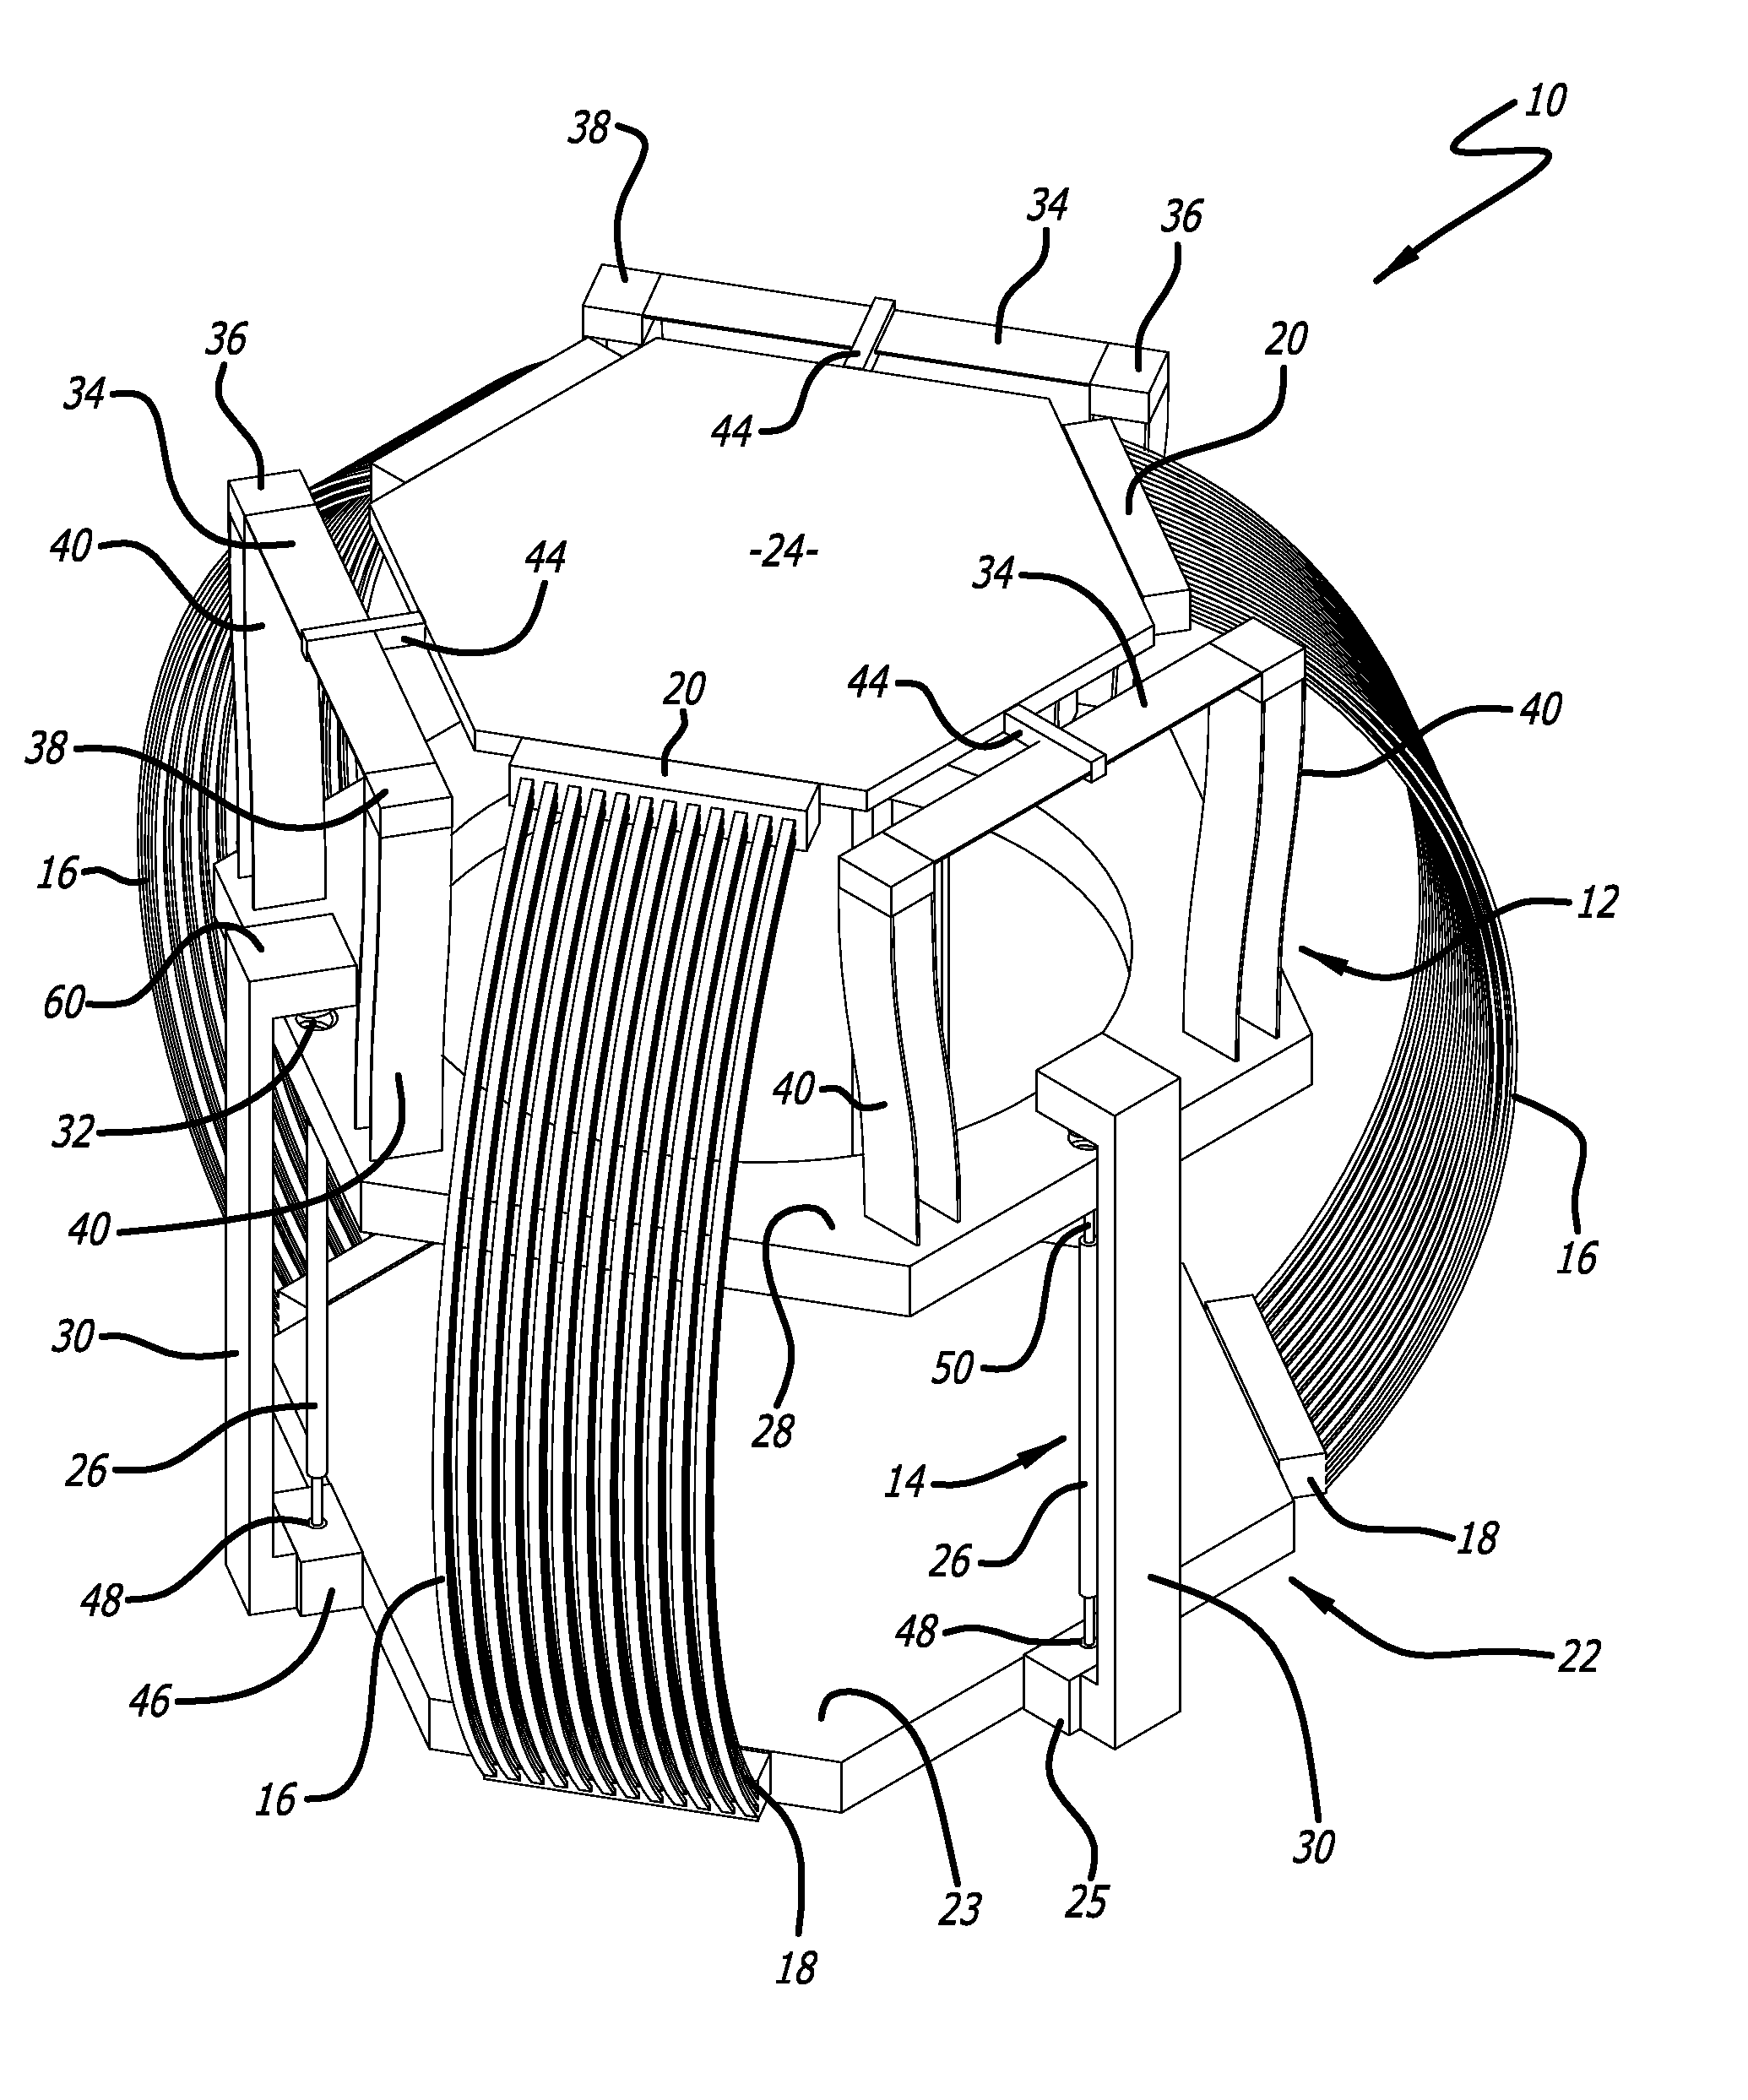 Thermal straps for spacecraft